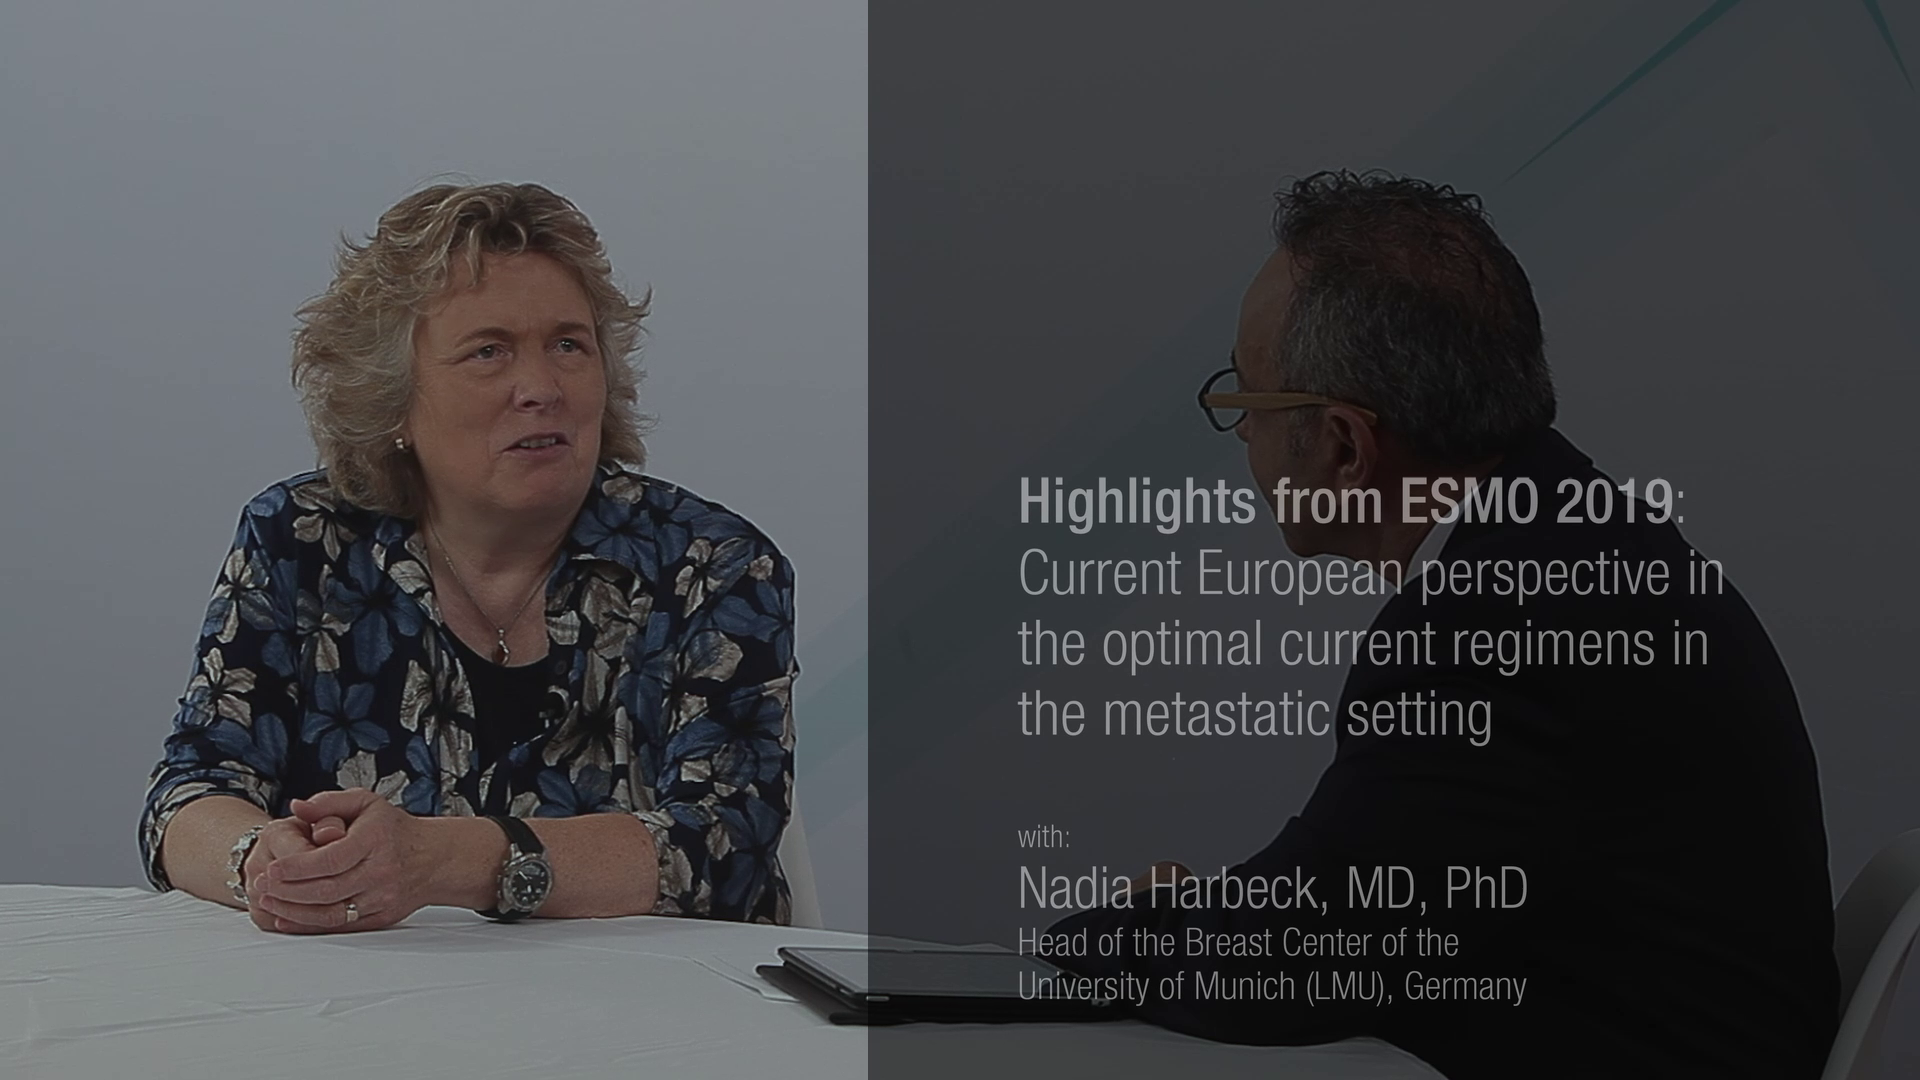 Current European perspective in the optimal current regimens in the metastatic setting